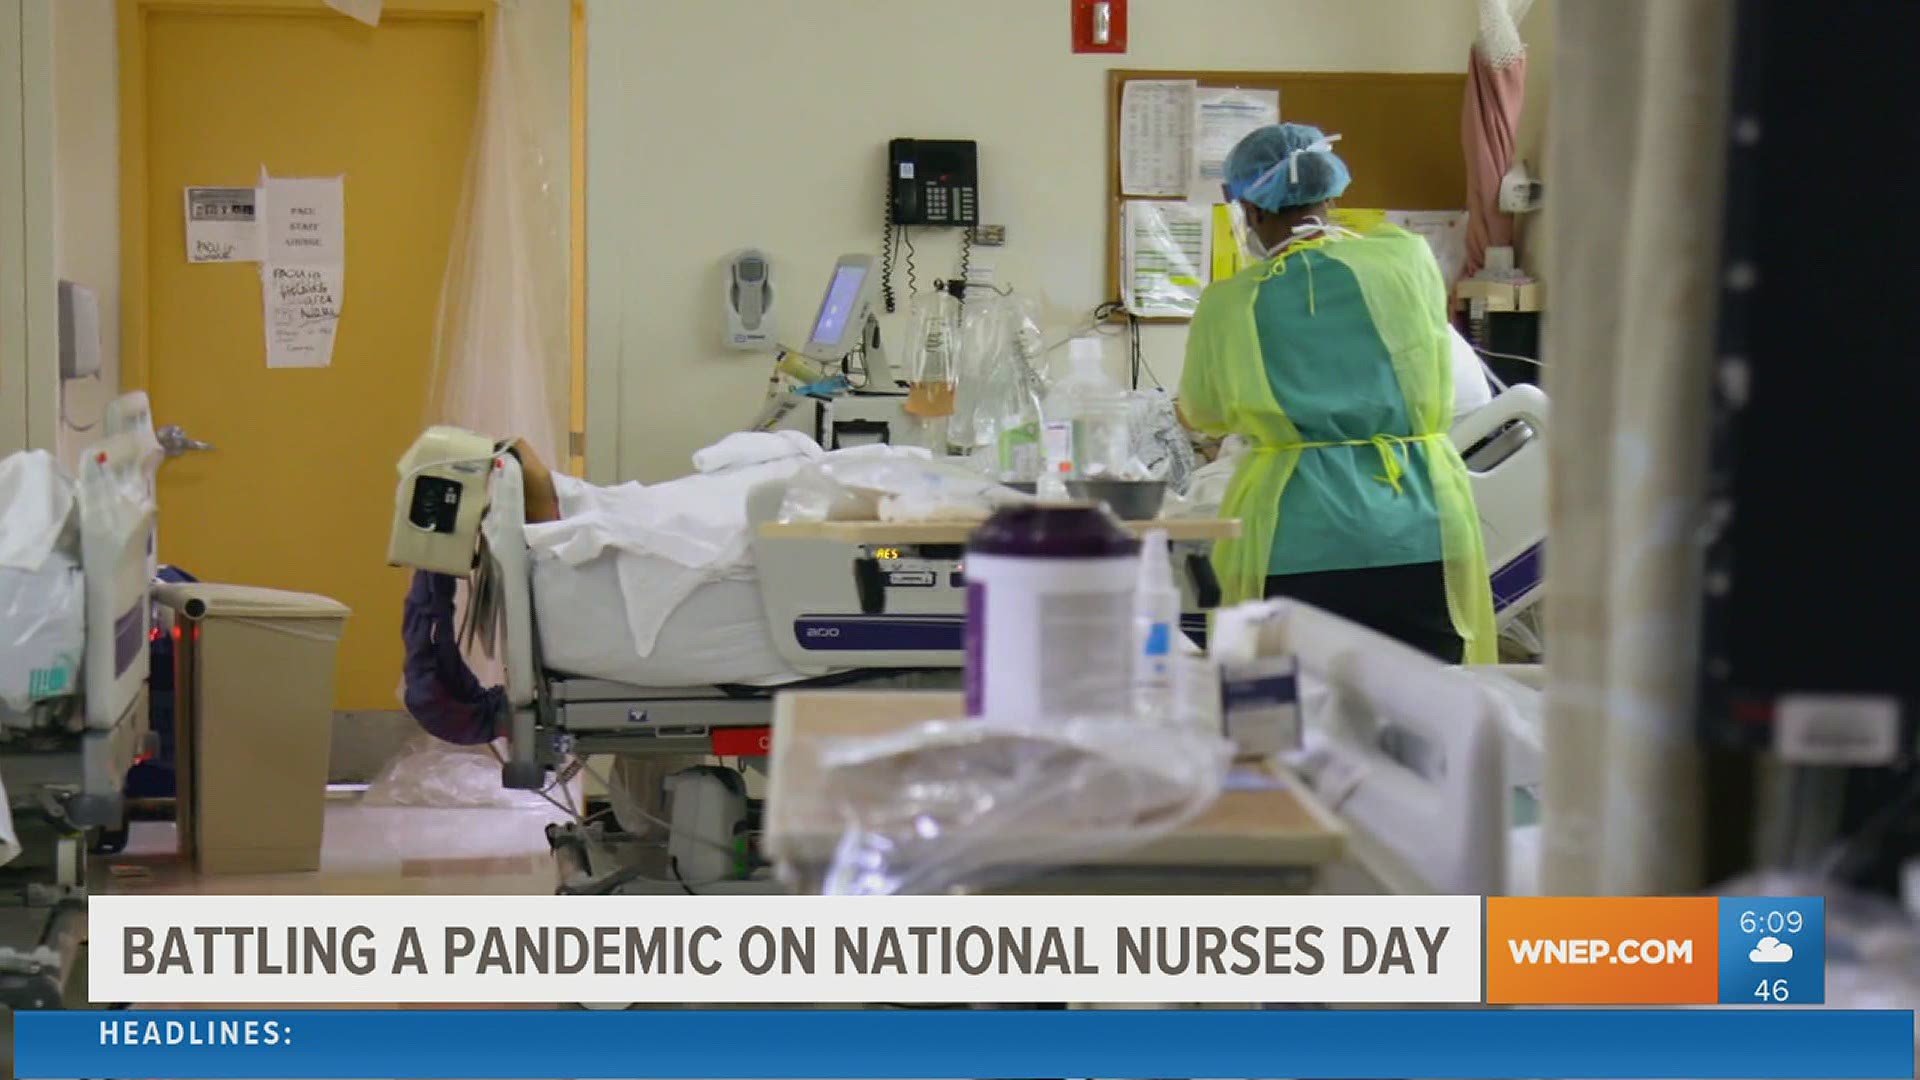 COVID-19 has made heroes out of the healthcare workers who battle the pandemic every day. It's why recognizing them on National Nurses Day is so important.